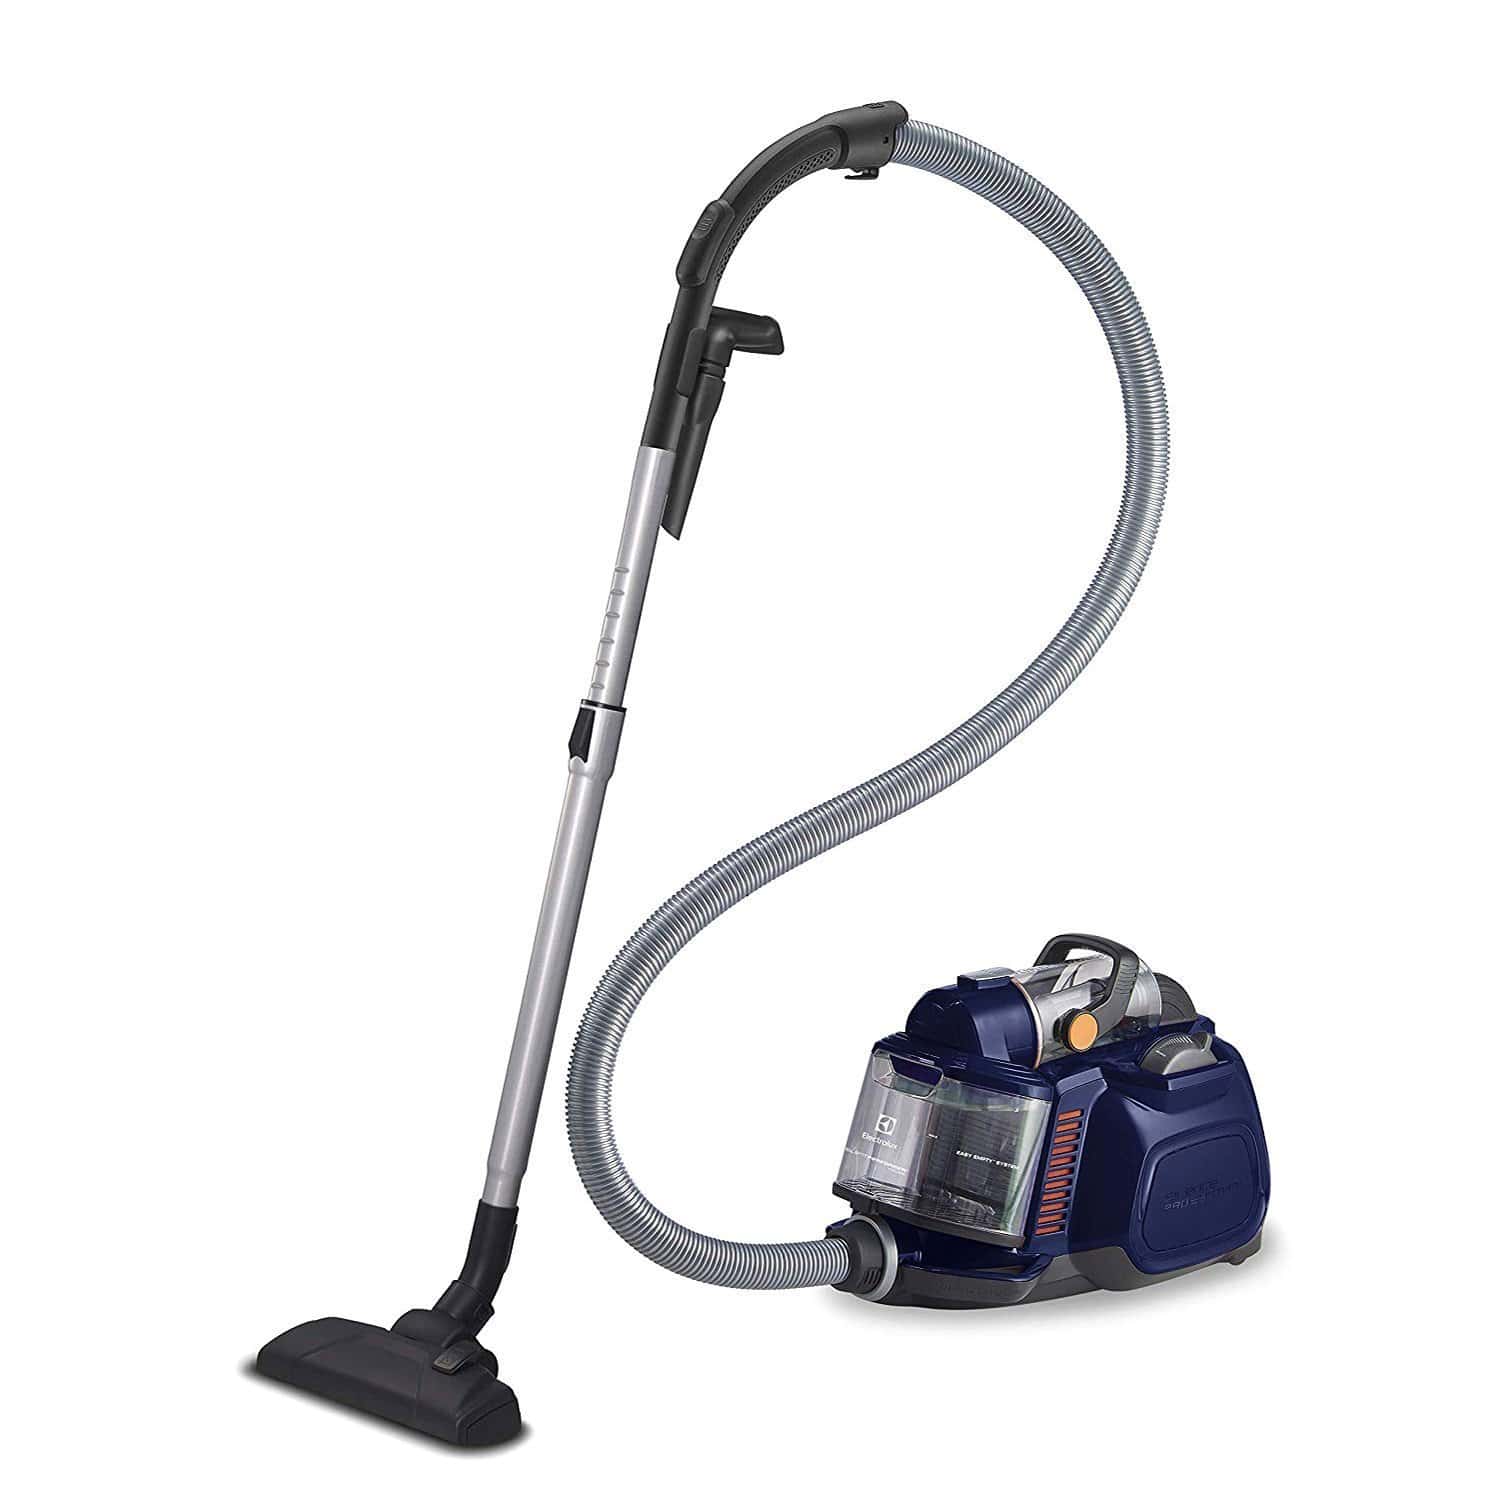 Electrolux Cyclonic 1.4 Litres Vacuum Cleaner - Blue - ZSPC2000 - Jashanmal Home